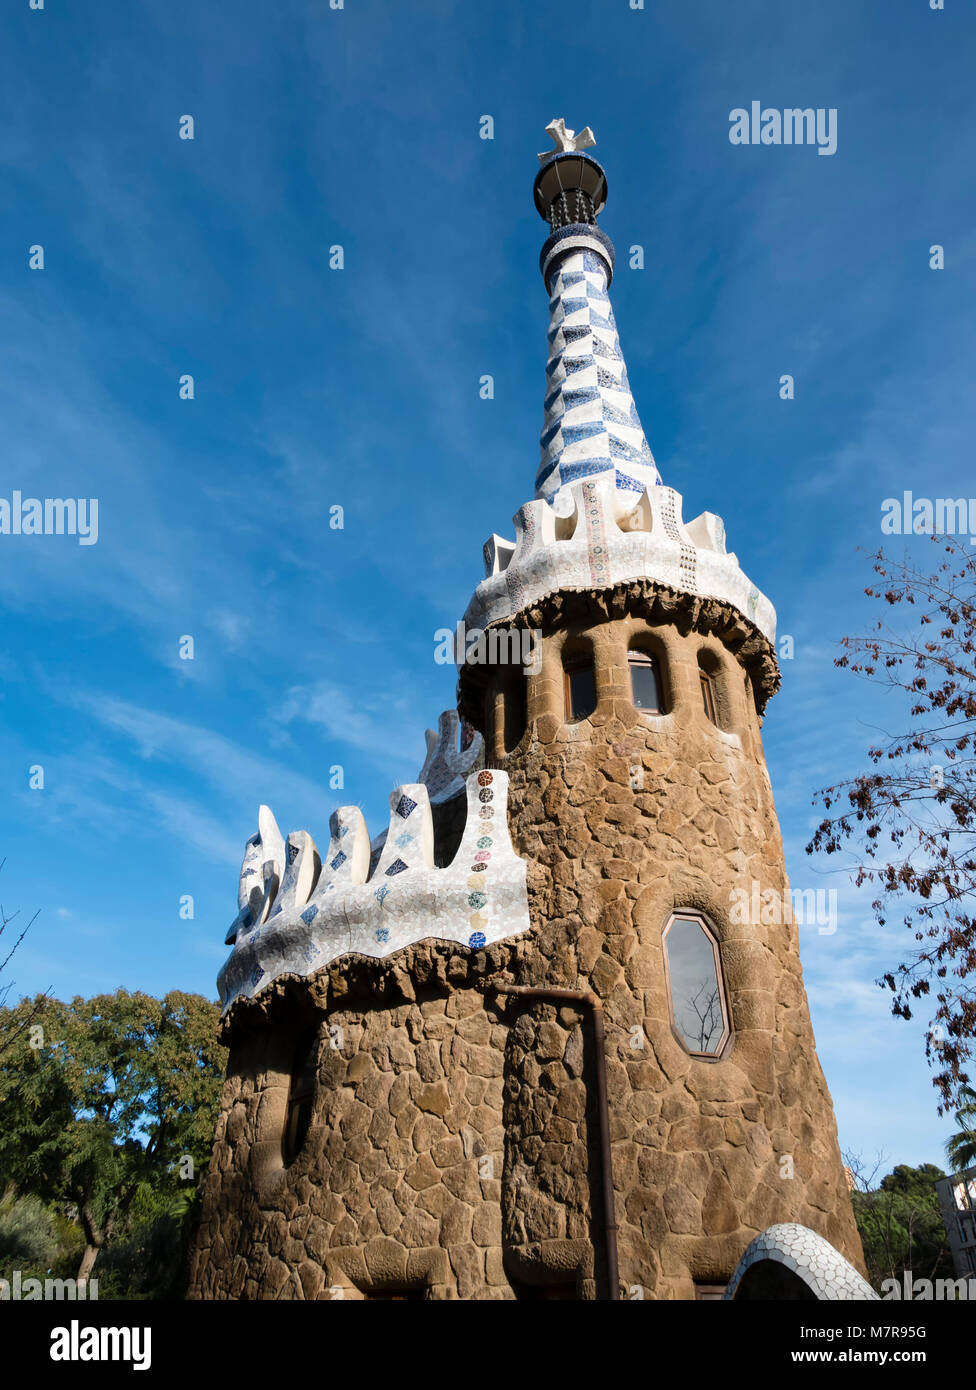 Entrance and Porter's Lodge, Park Guell, Barcelona, Catalonia, Spain. Stock Photo